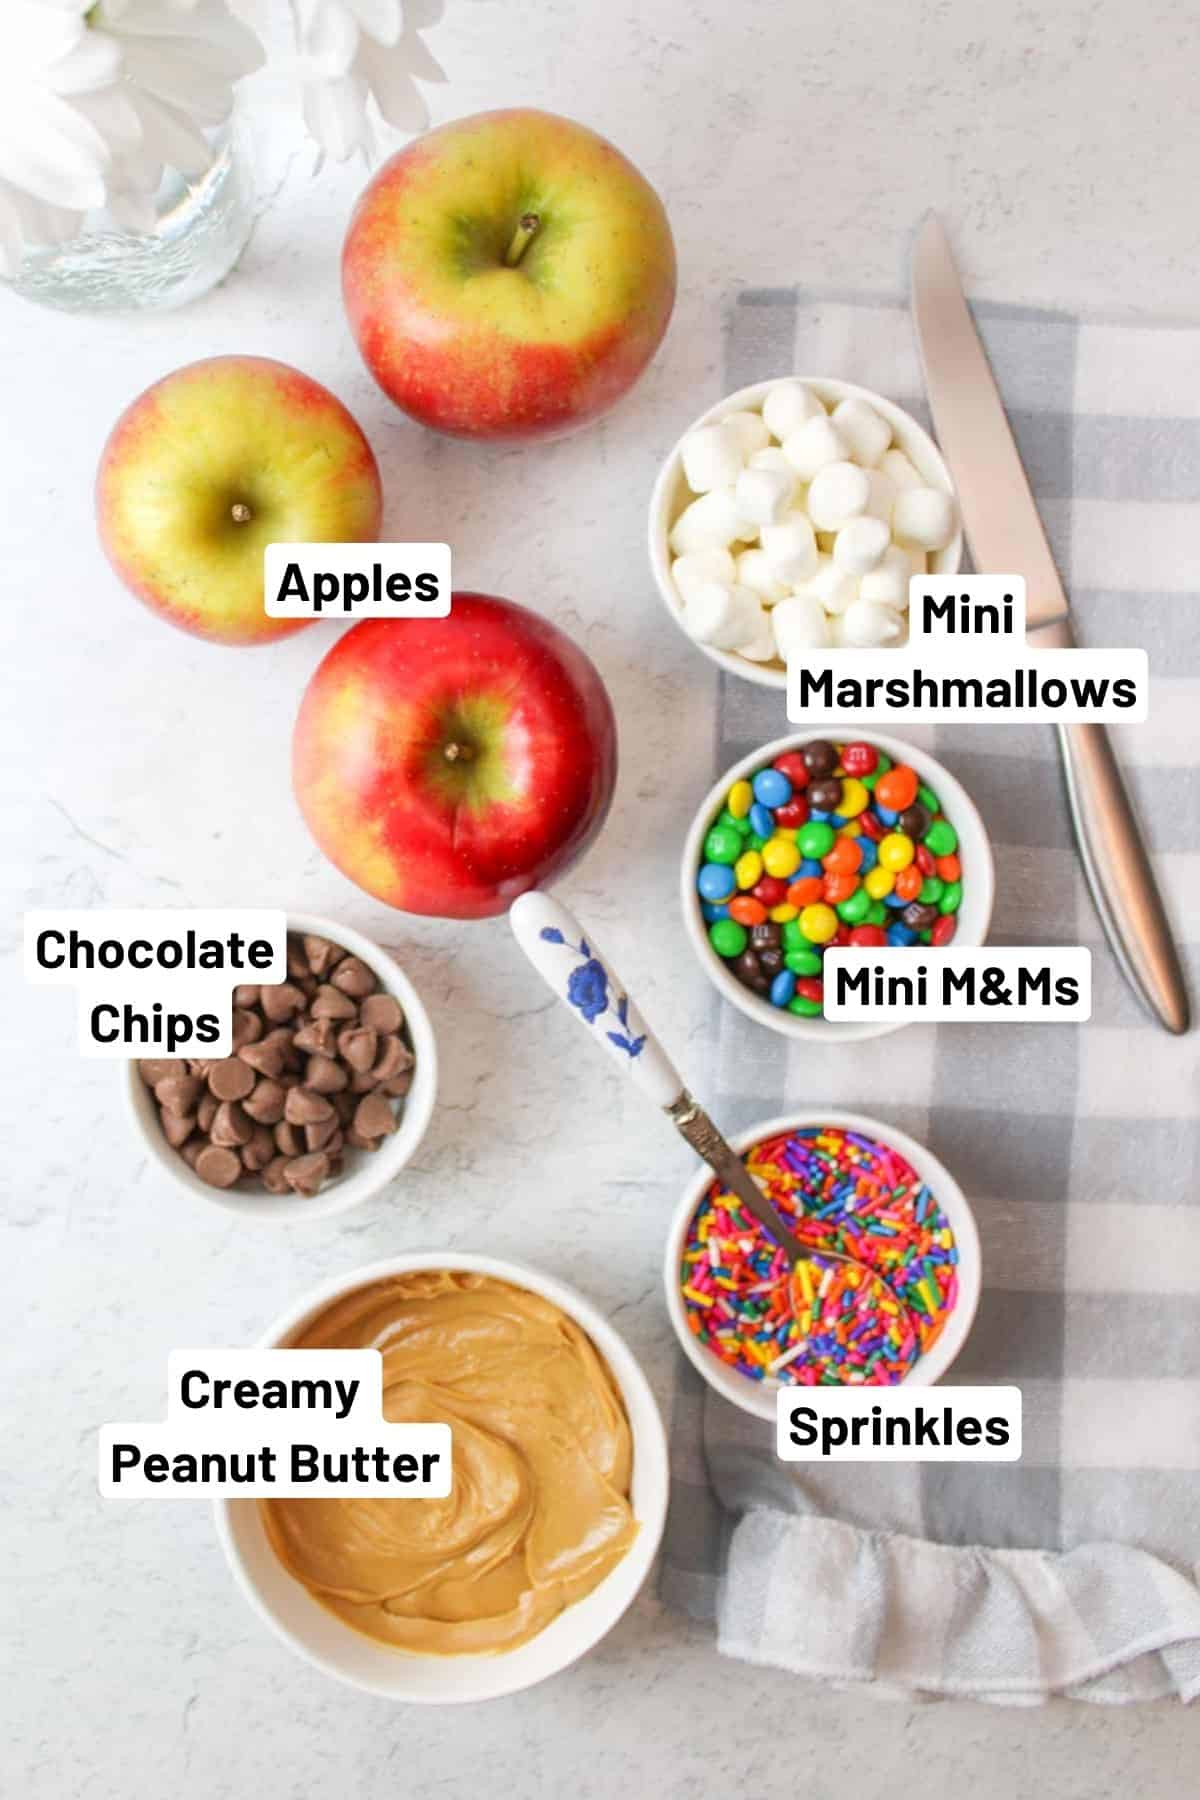 ingredients needed for apple nachos next to a sharp knife and kitchen towel